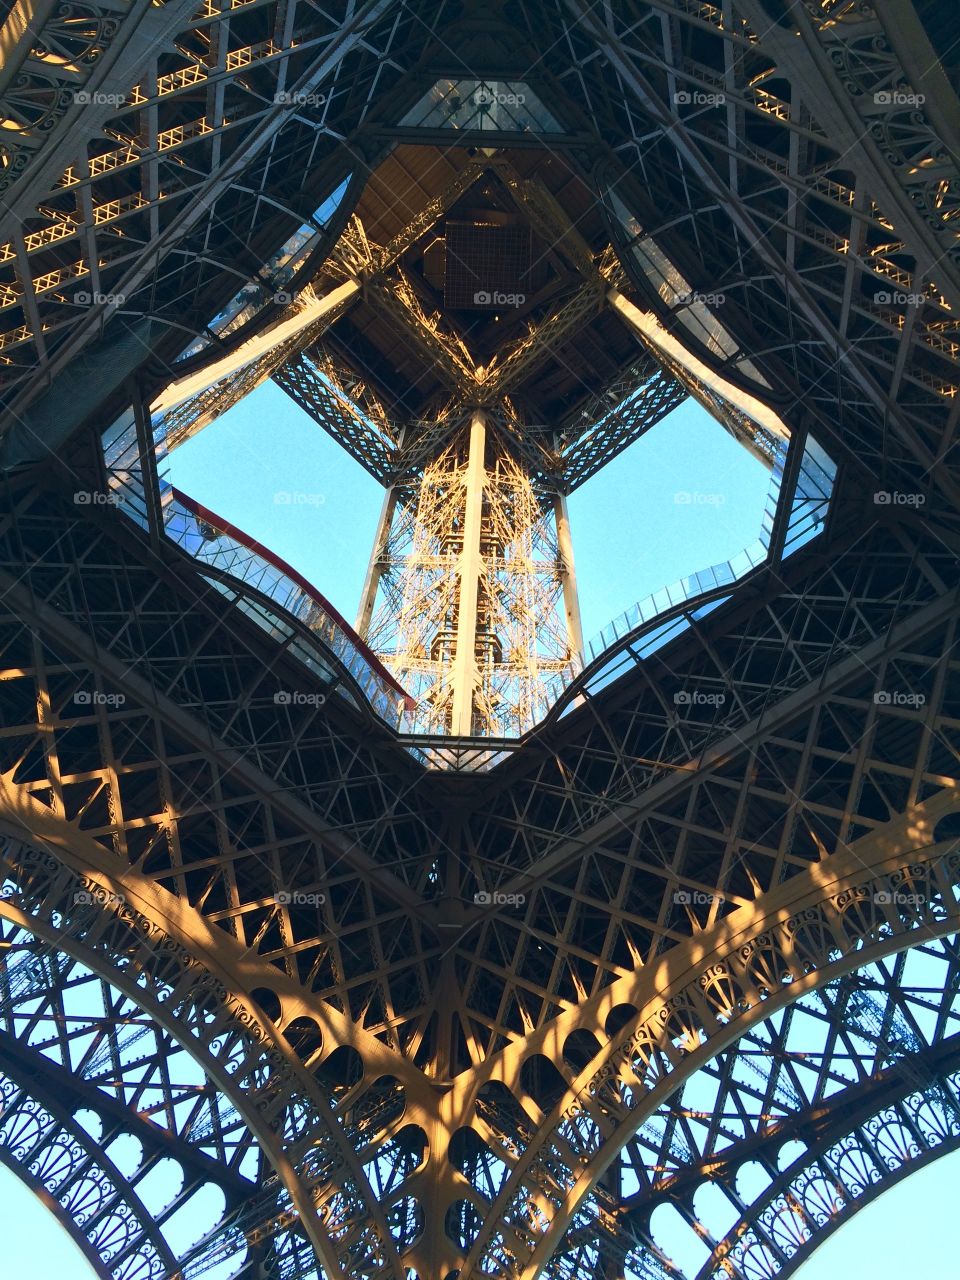 Tour Eiffel . Looking up!